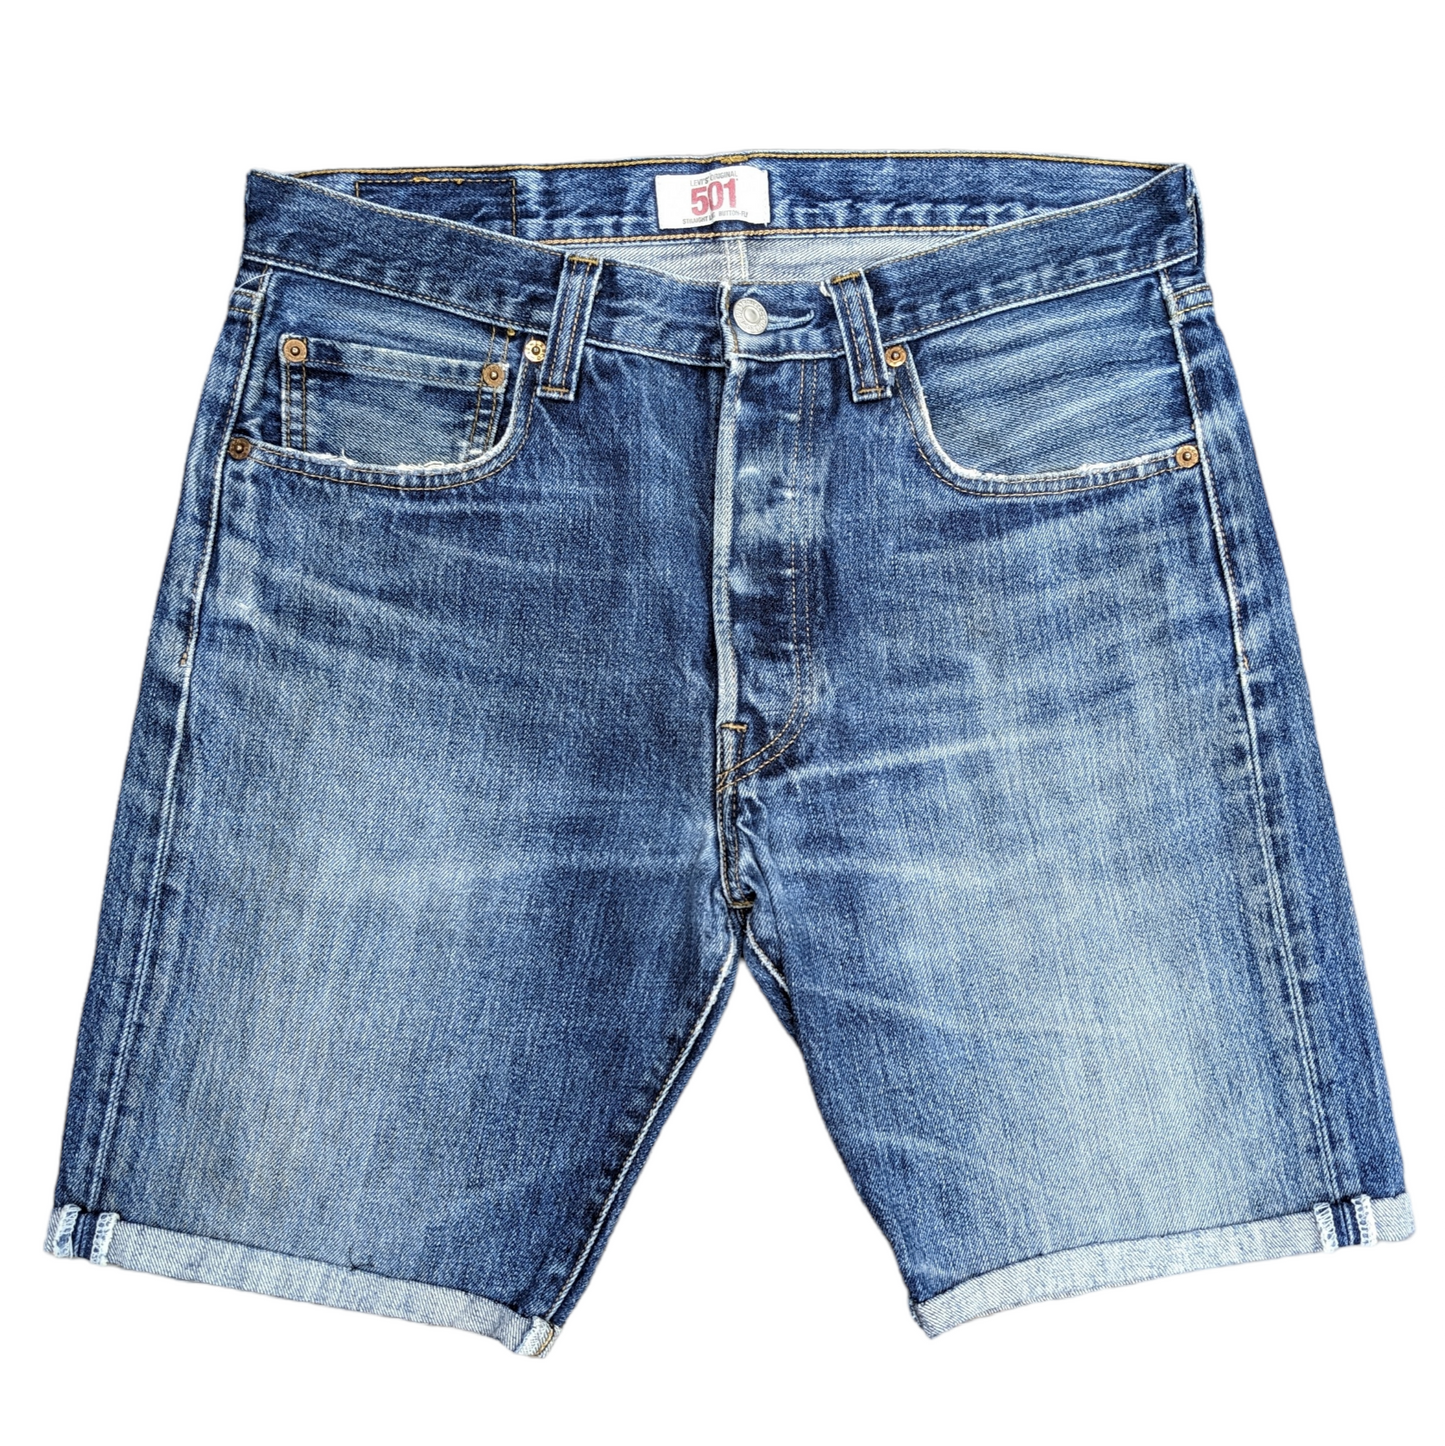 Levi’s 501 Straight Fit Shorts W32